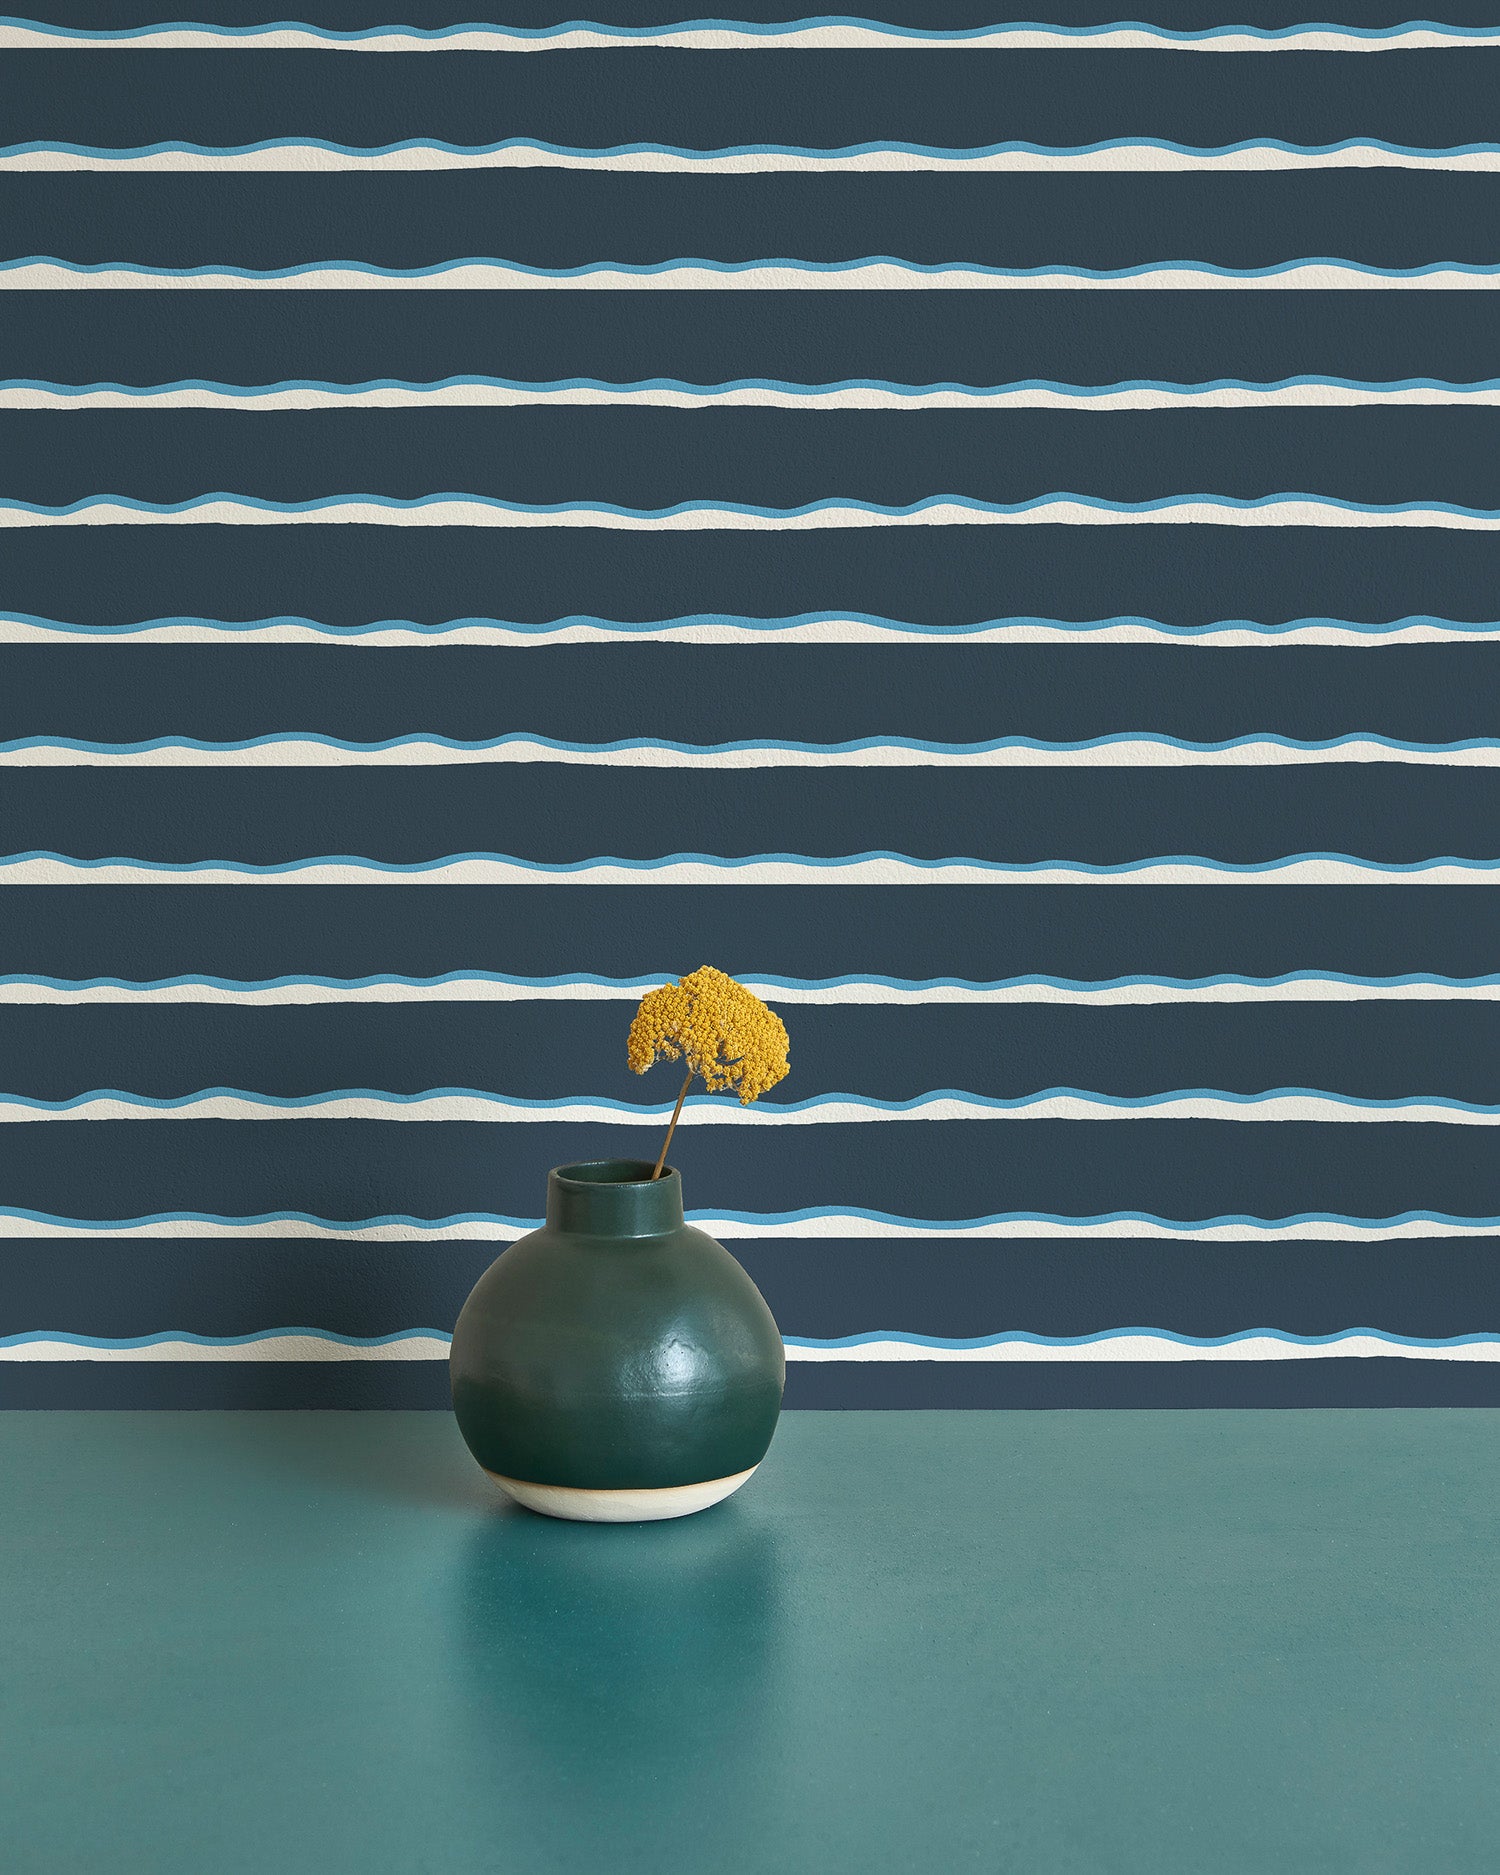 A vase with a flower stands in front of a wall papered in an undulating stripe pattern in blue, white and navy.